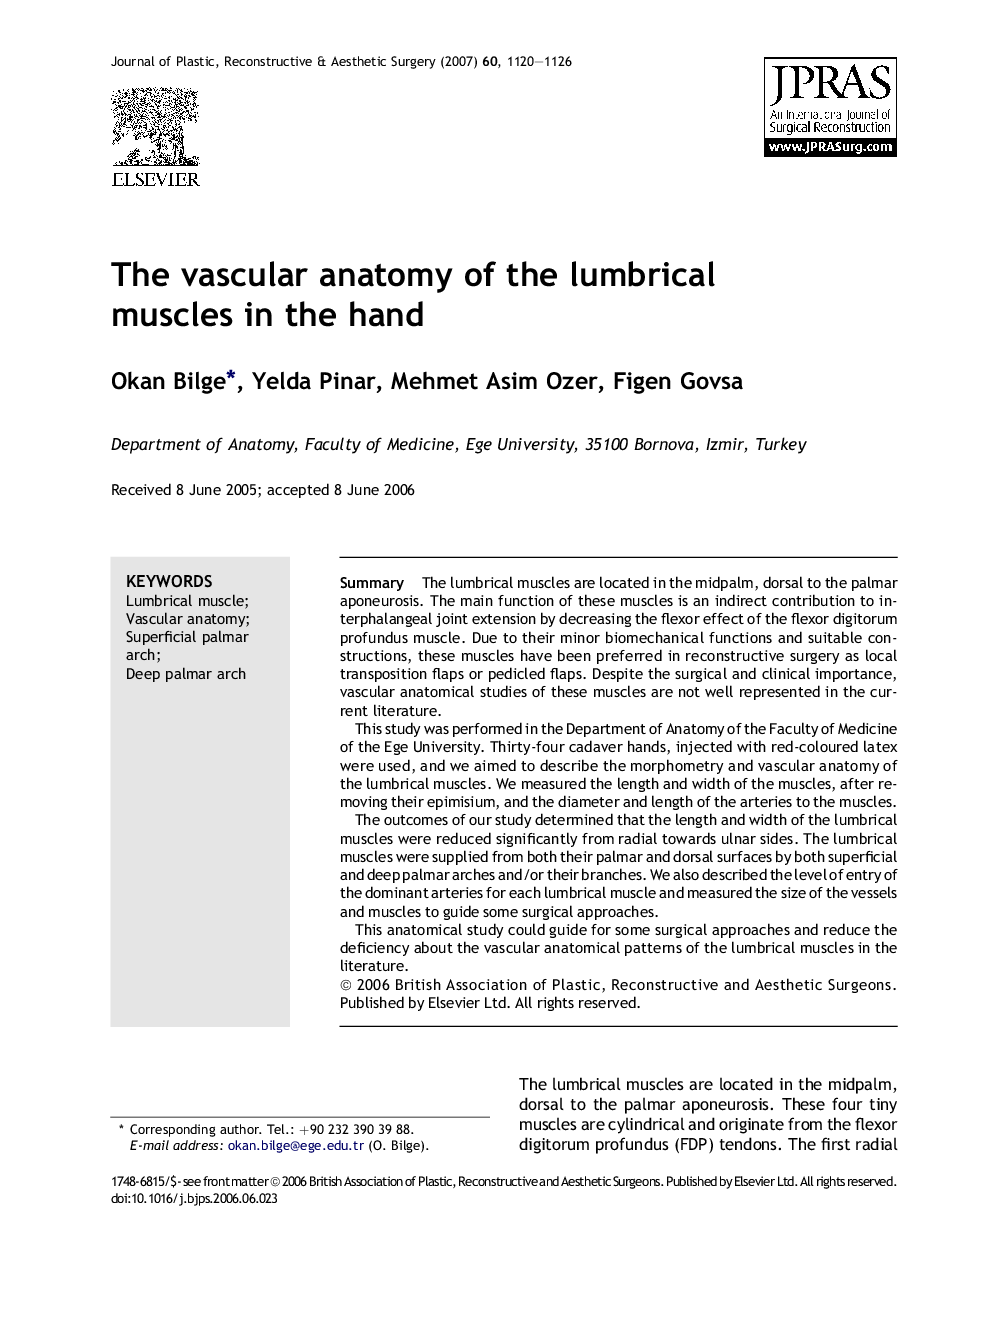 The vascular anatomy of the lumbrical muscles in the hand